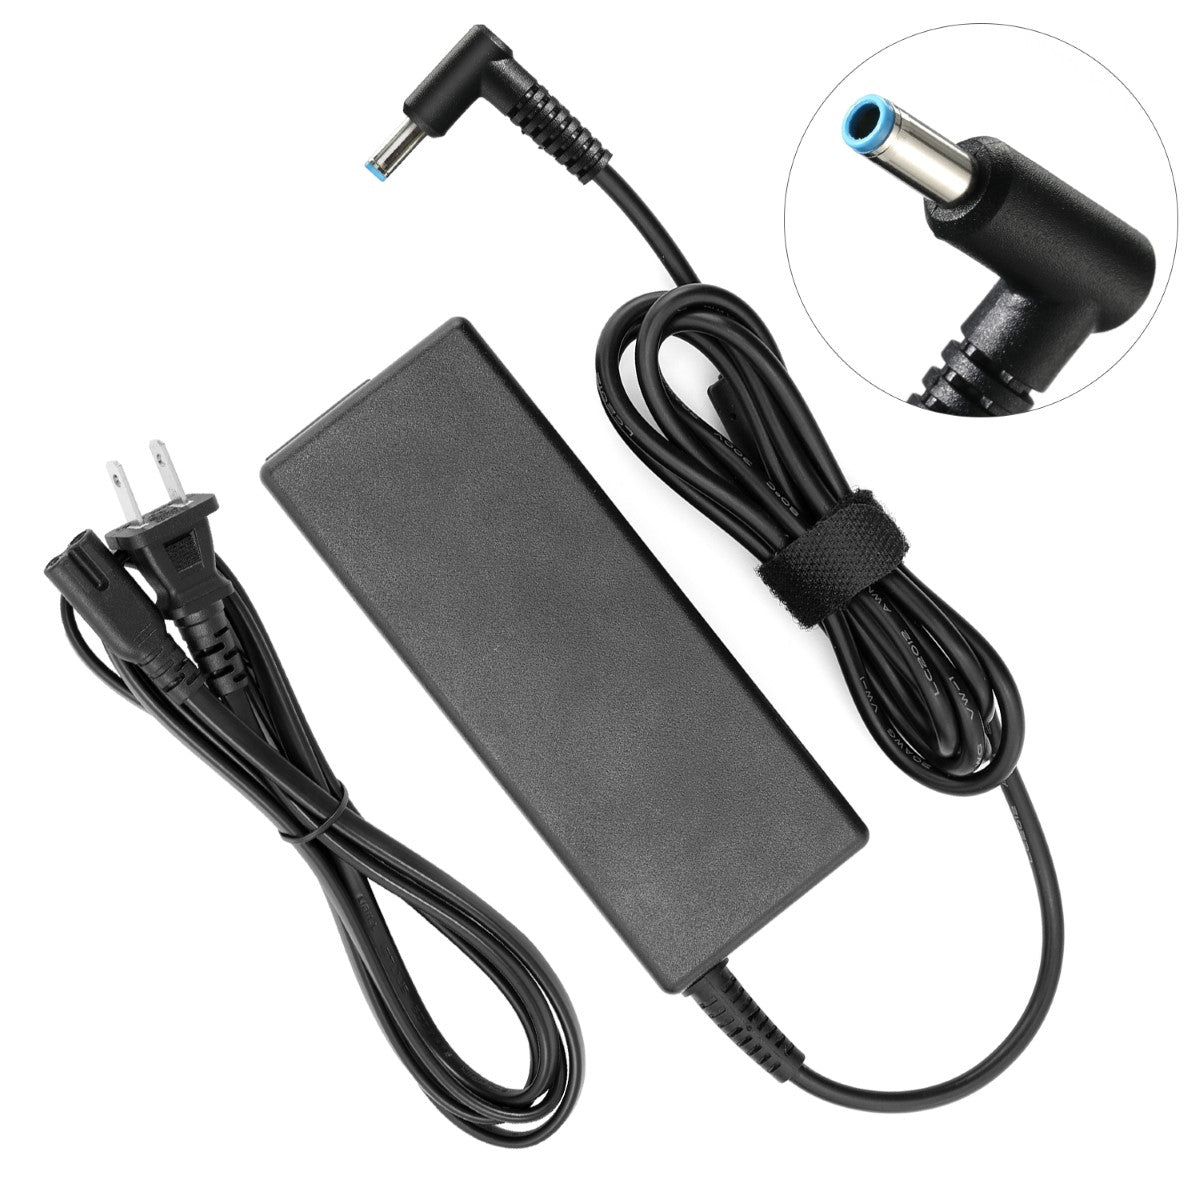 AC Adapter Charger for HP Envy Touchsmart 17-j181nr Notebook.